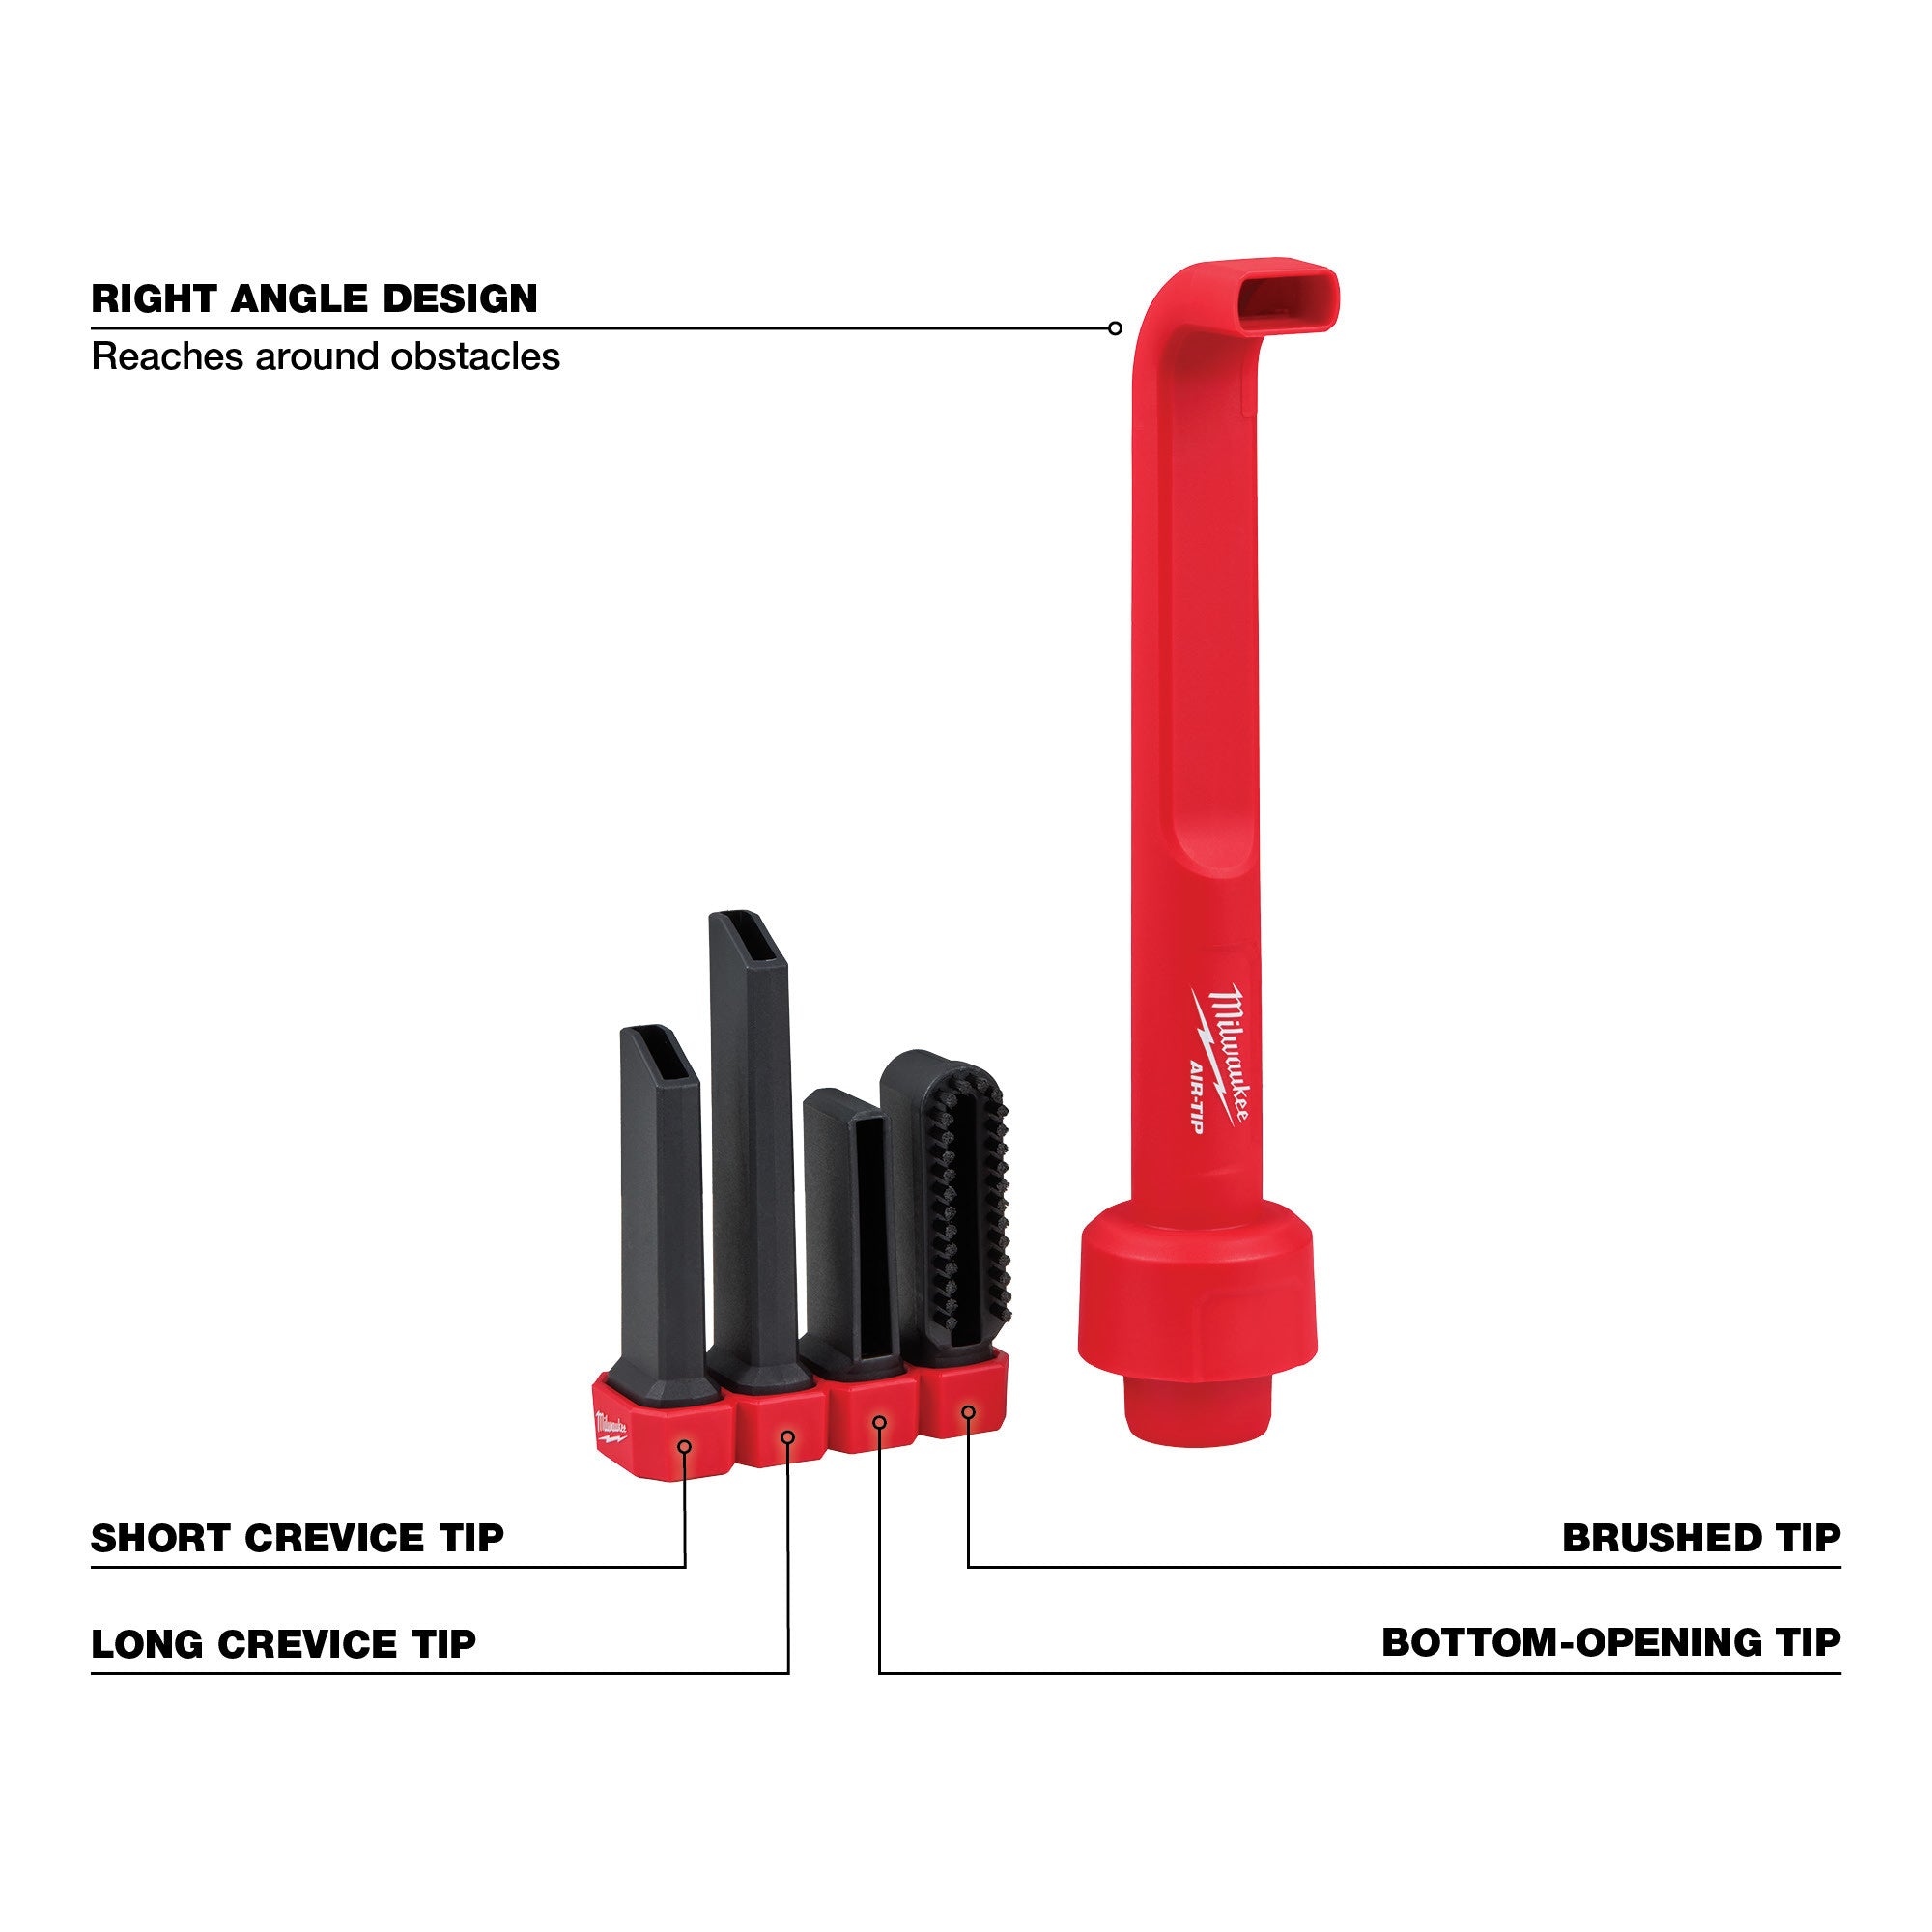 AIR-TIP 4-in-1 Right Angle Cleaning Tool